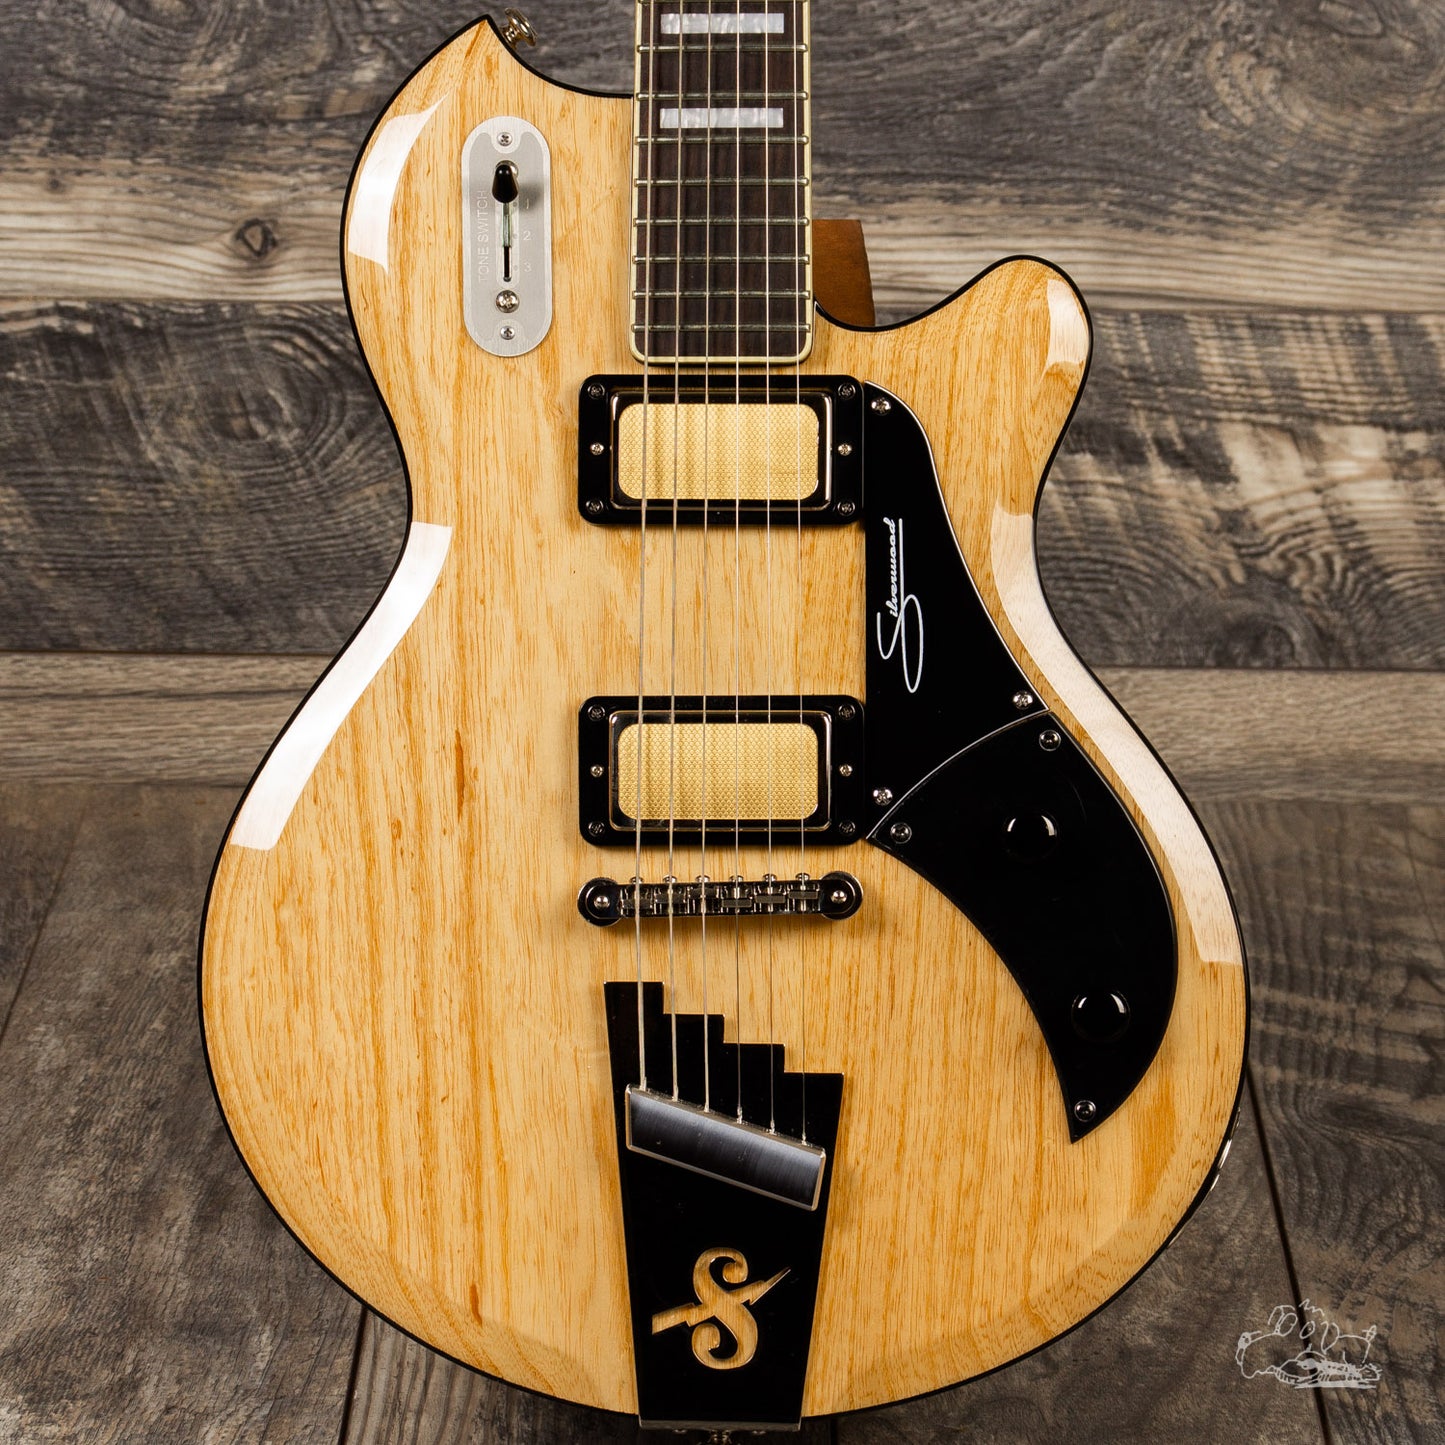 2019 Supro Silverwood in Ash Natural With Gig Bag - Make us an offer!